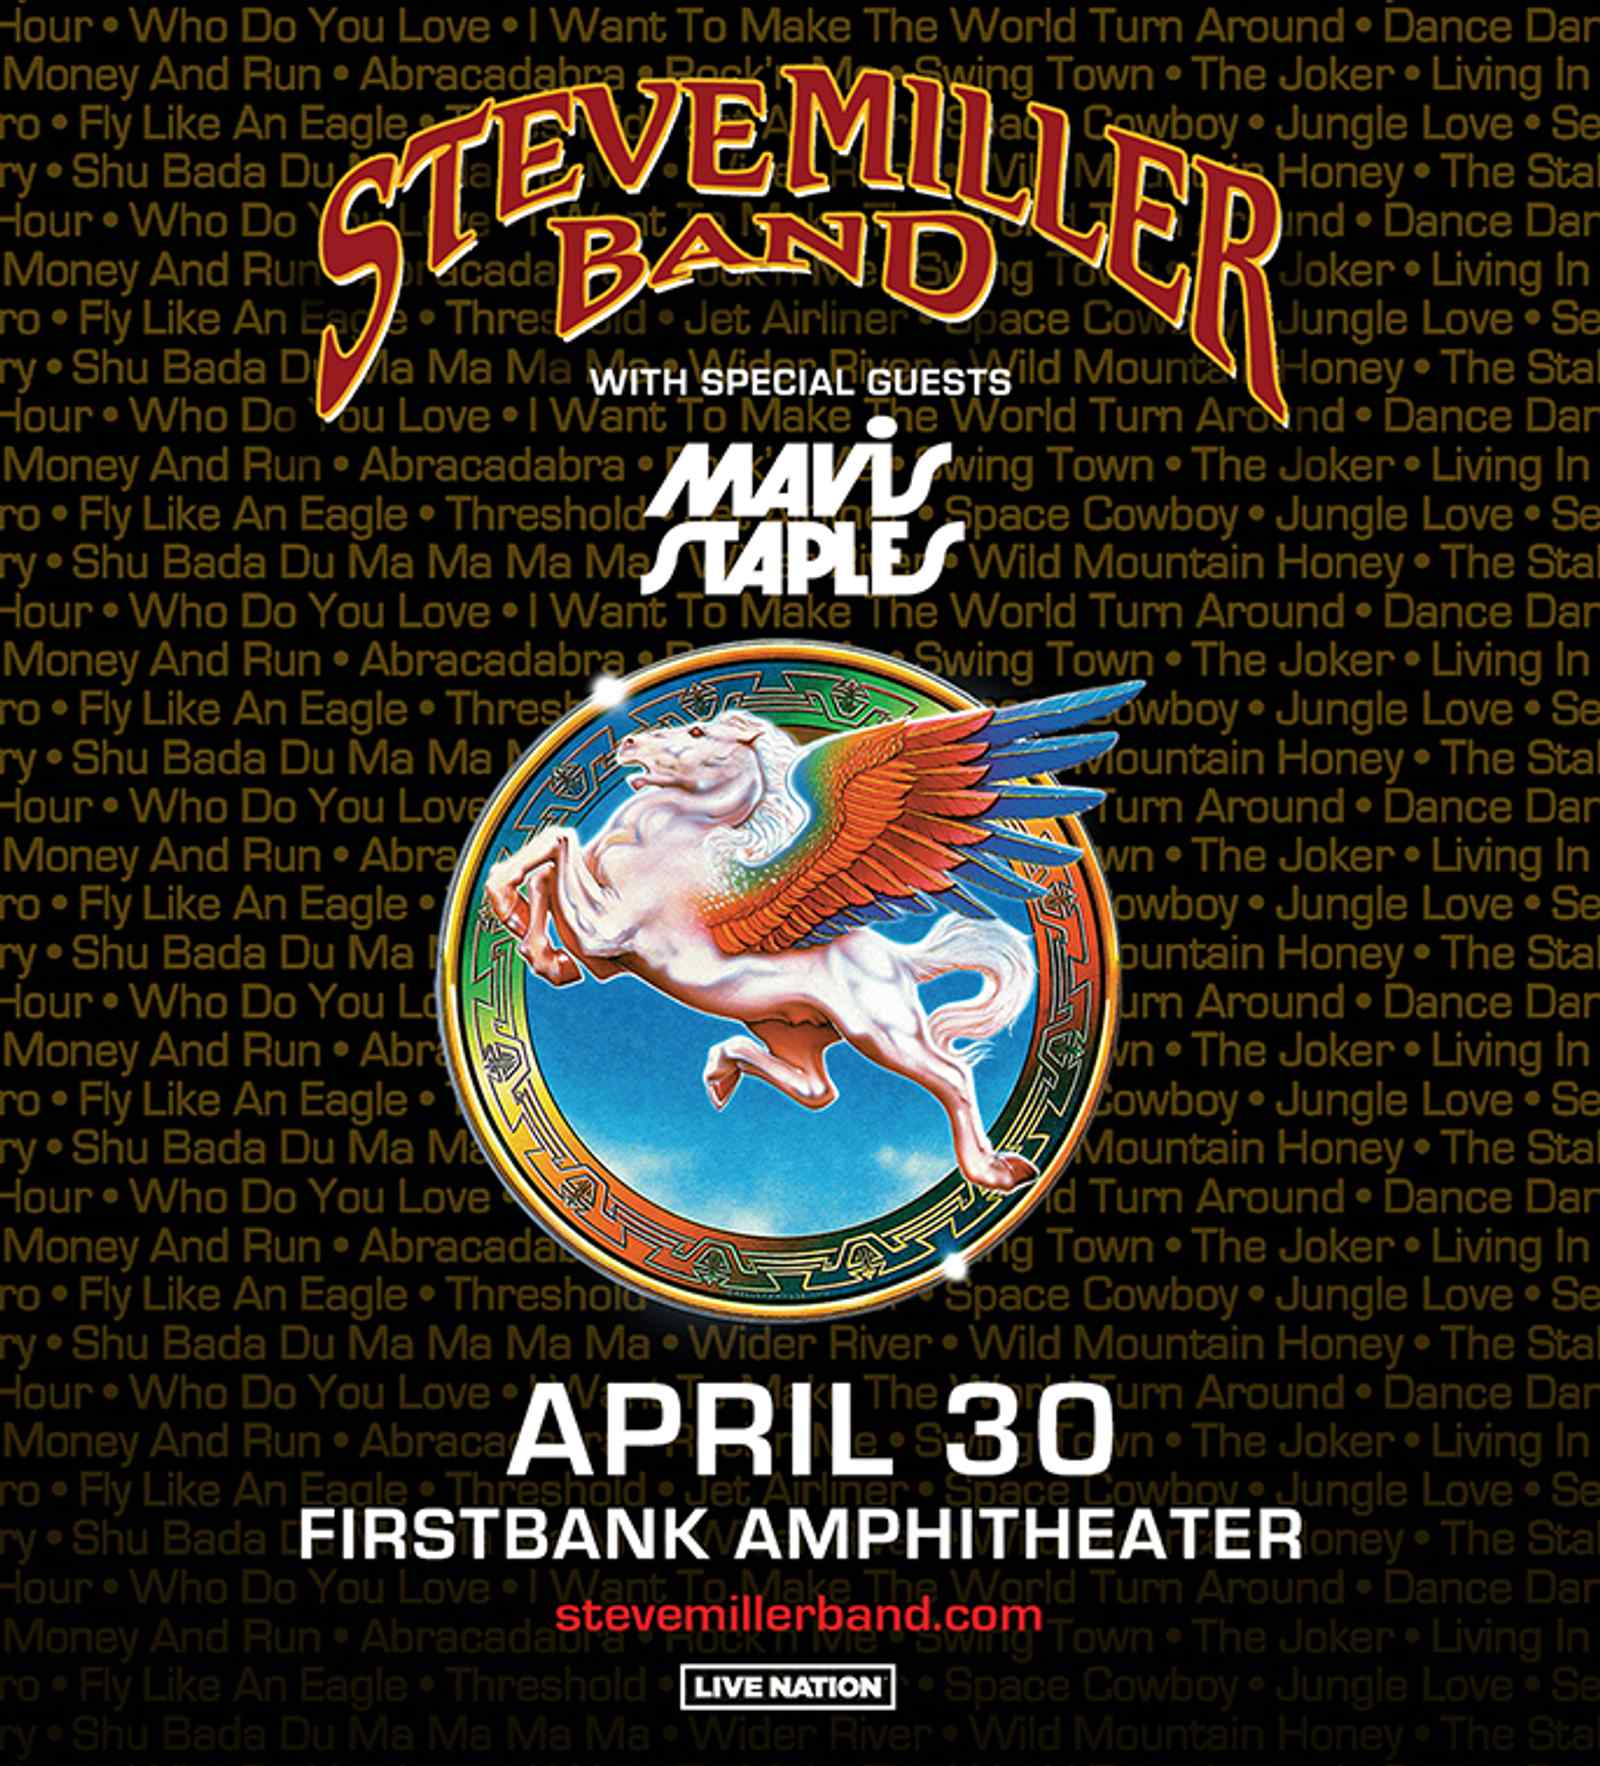 Steve Miller Band with very special guest Mavis Staples in Franklin, TN_Concert at FirstBank Amphitheater.